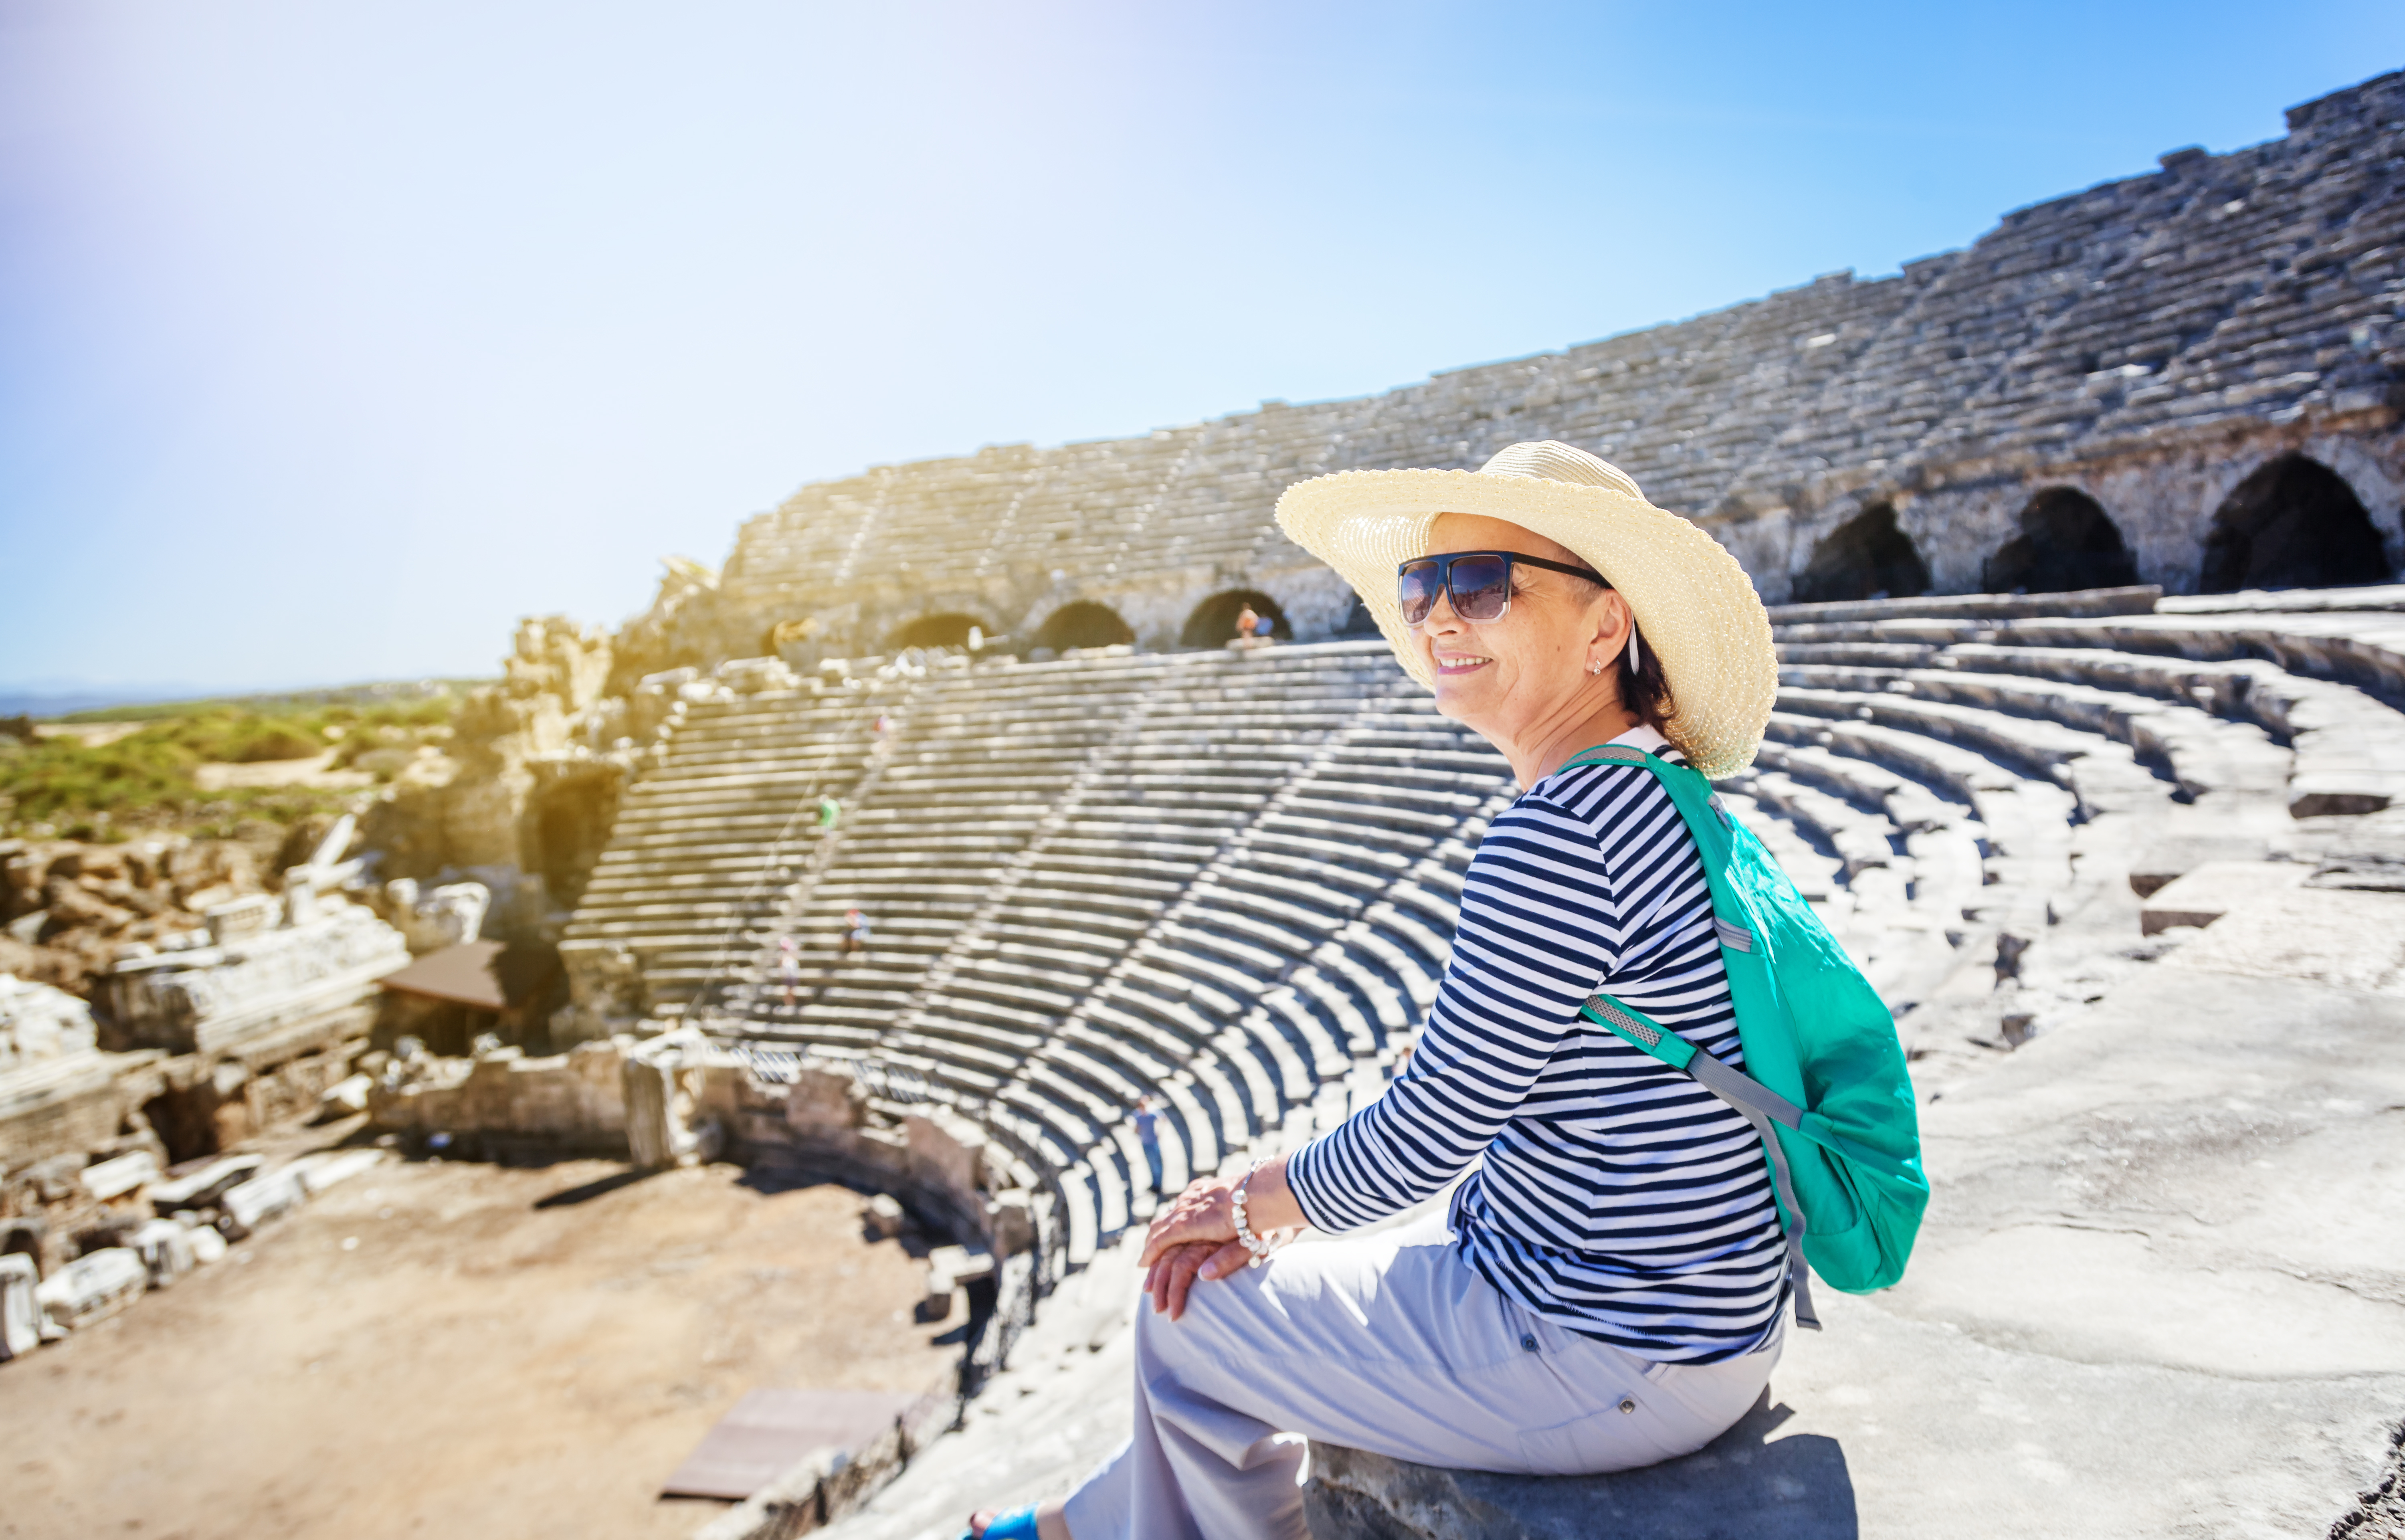 Elderly woman wears sunglasses and floppy hat as she sits smiling and admiring the scenery of an ancient amphitheater on a sunny day